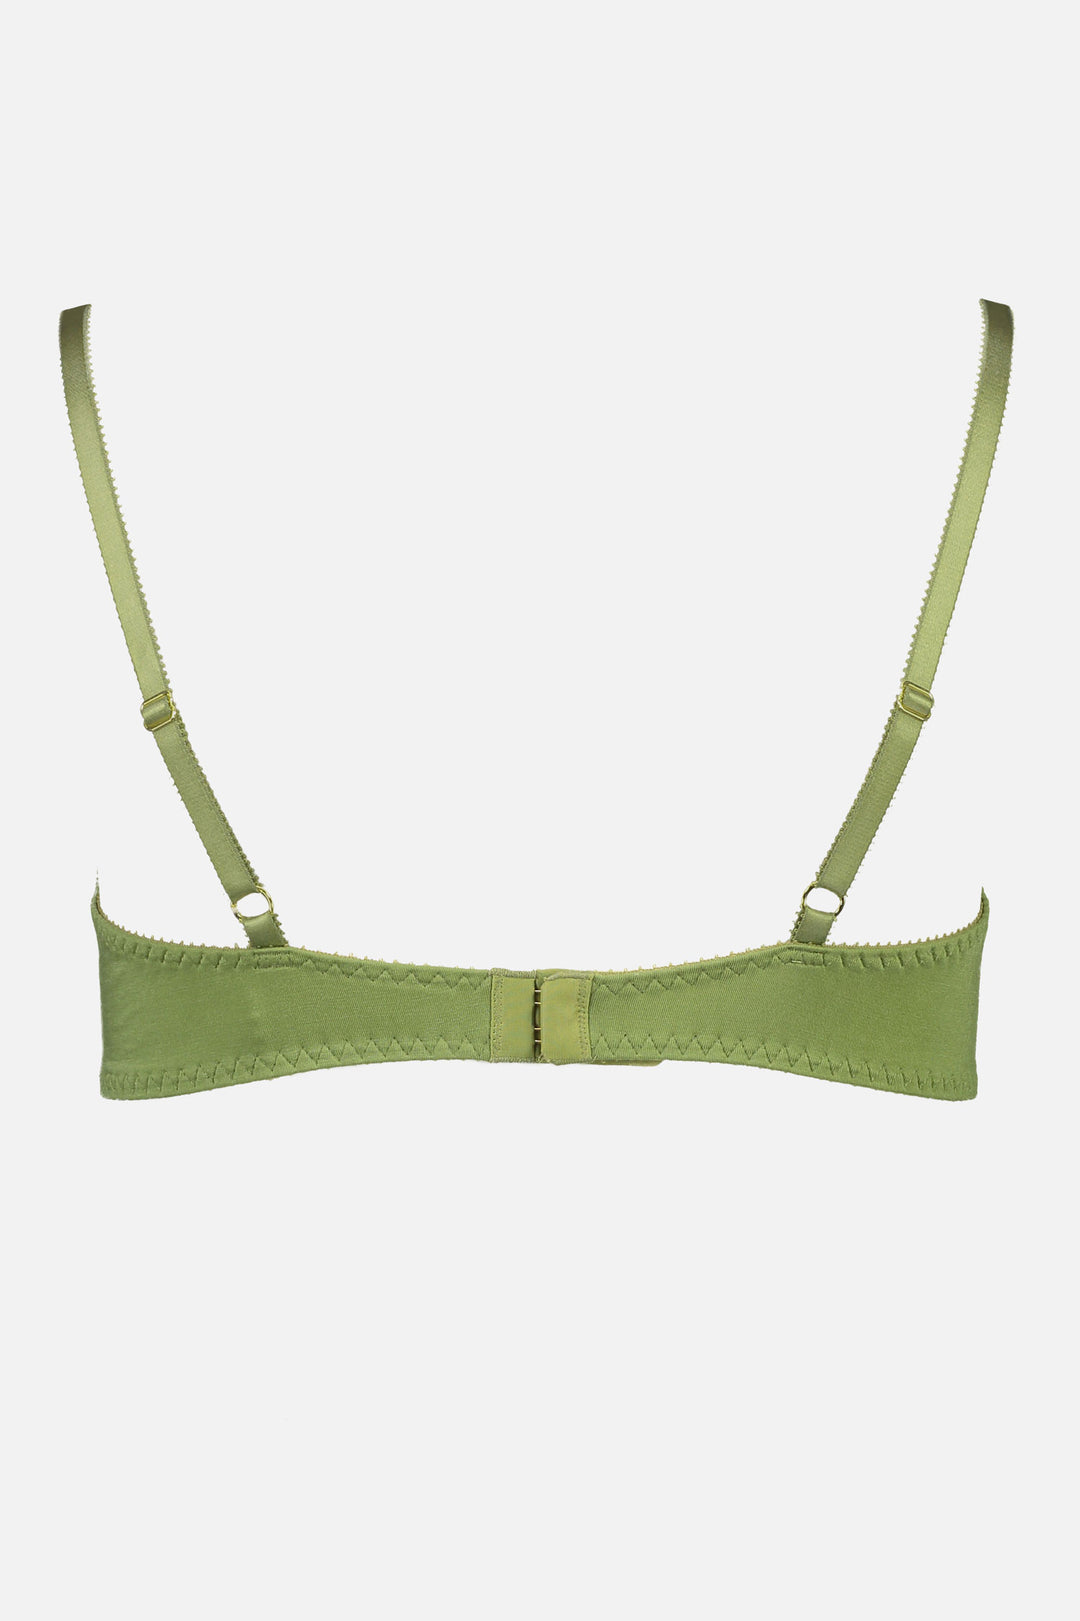 Videris Lingerie Angela wire free soft cup bra in olive TENCEL™ features adjustable back straps and hook and eyes closure